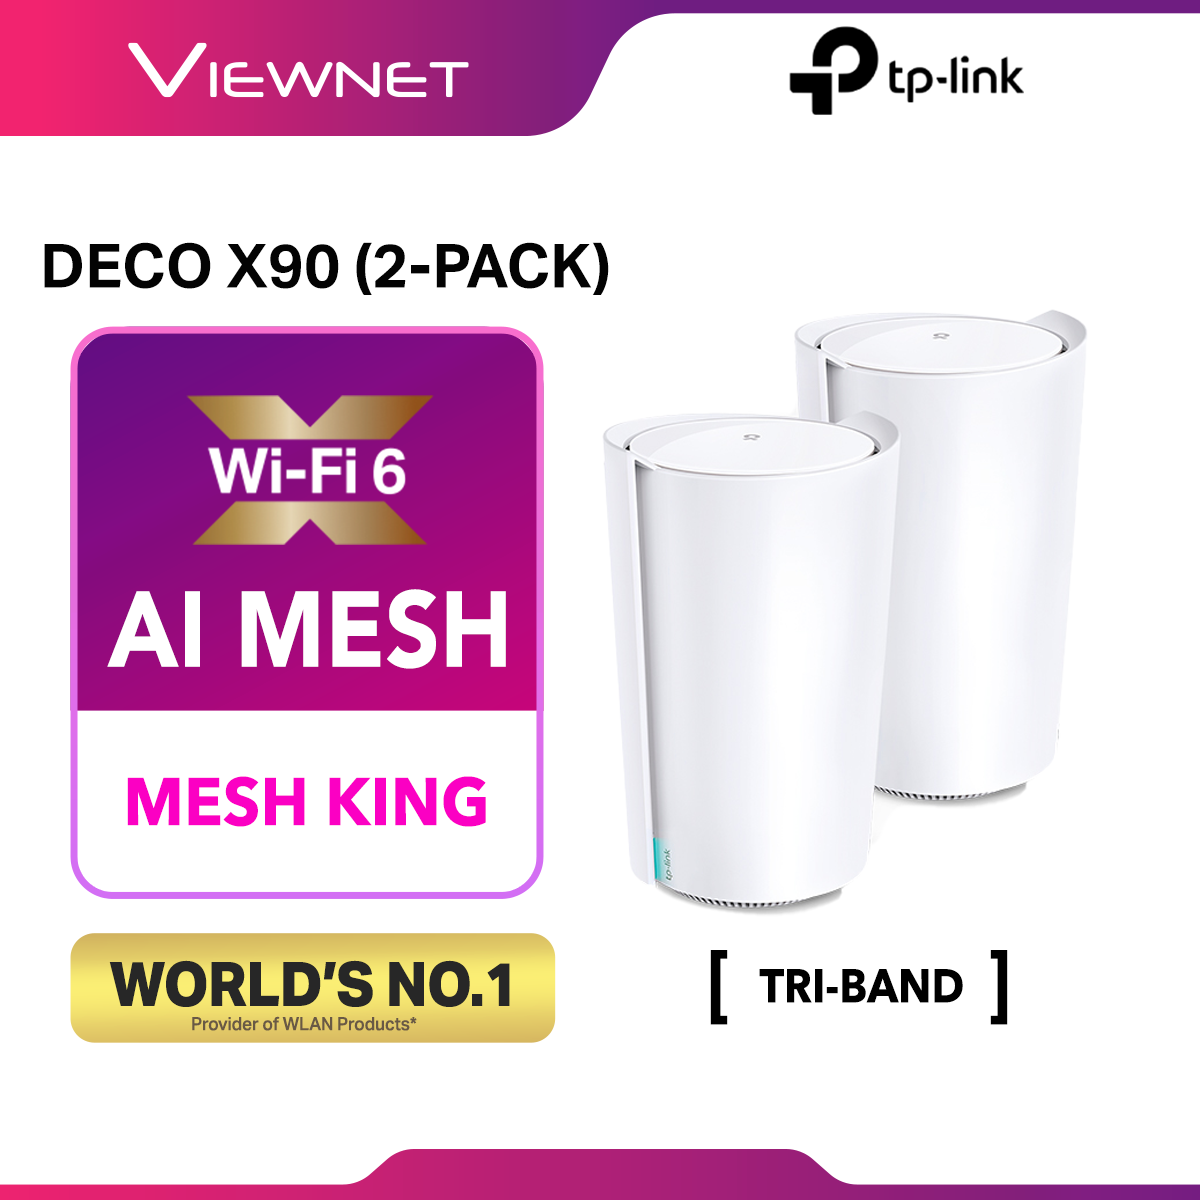 TP-LINK Deco X90 (2-Pack) - AX6600 Whole Home Mesh Wi-Fi System with AI Driven Mesh